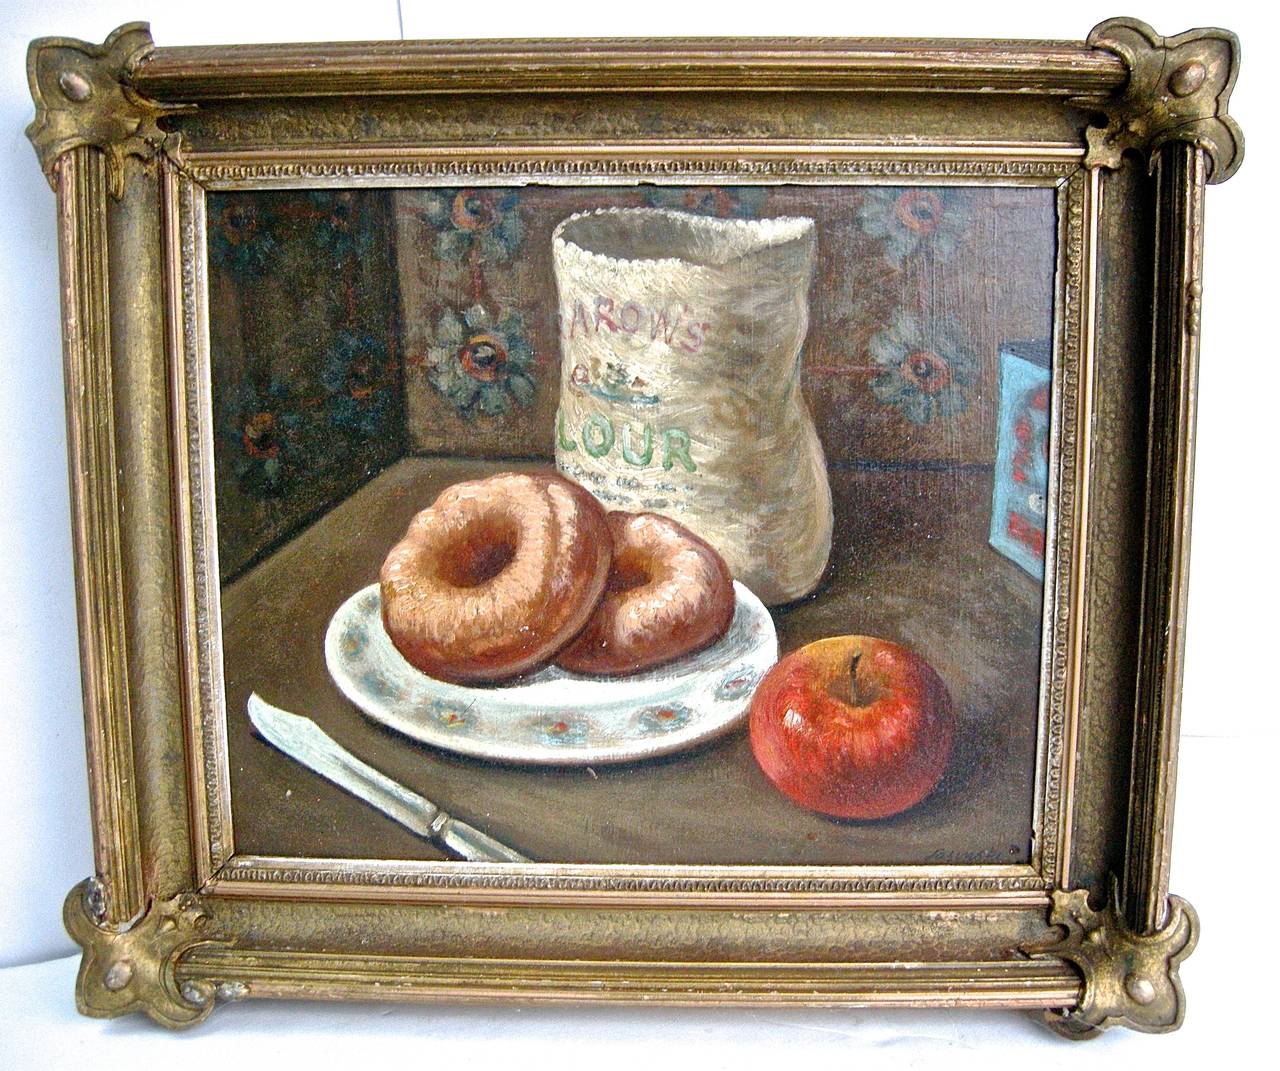 Terrific vintage still life painting. Oil on board, having a whimsical 